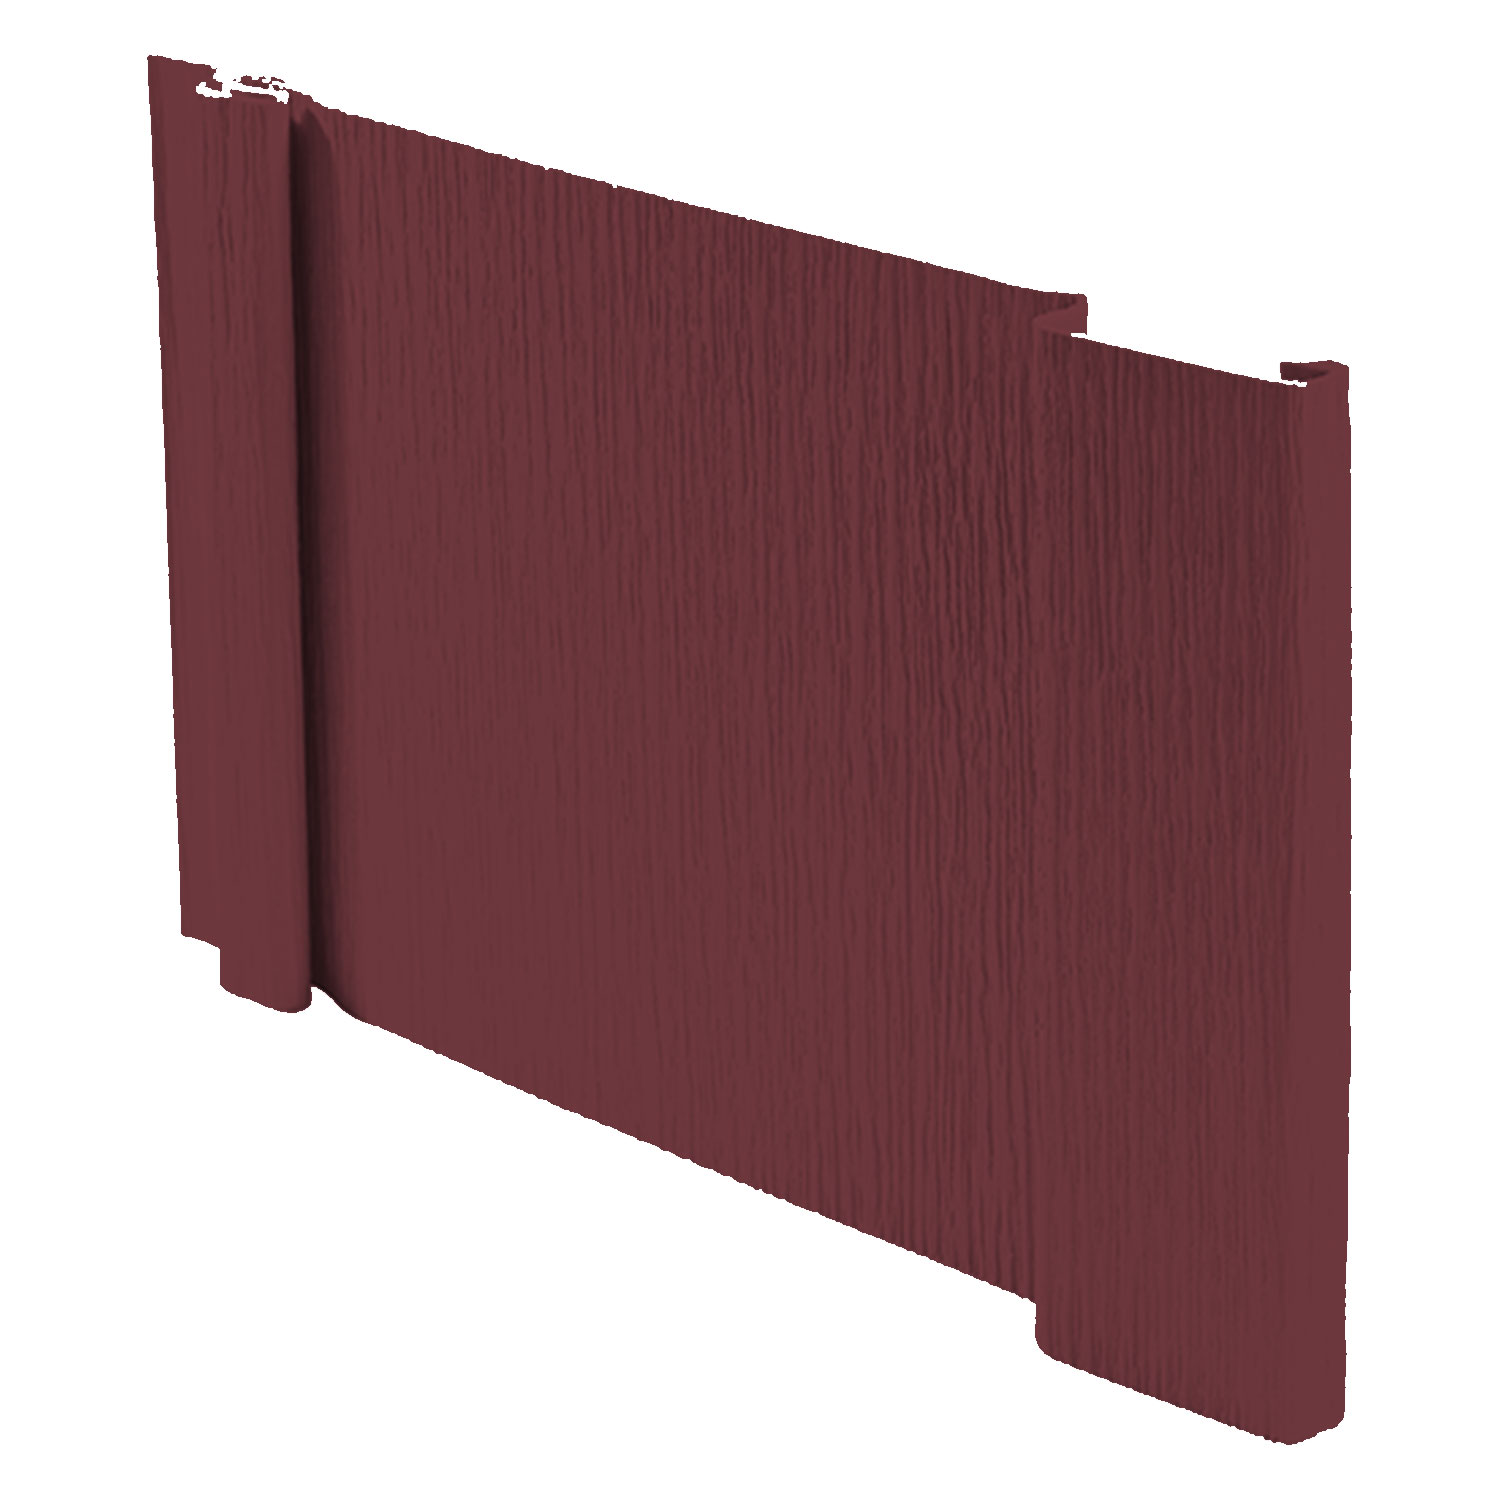 Heritage Red Board Siding